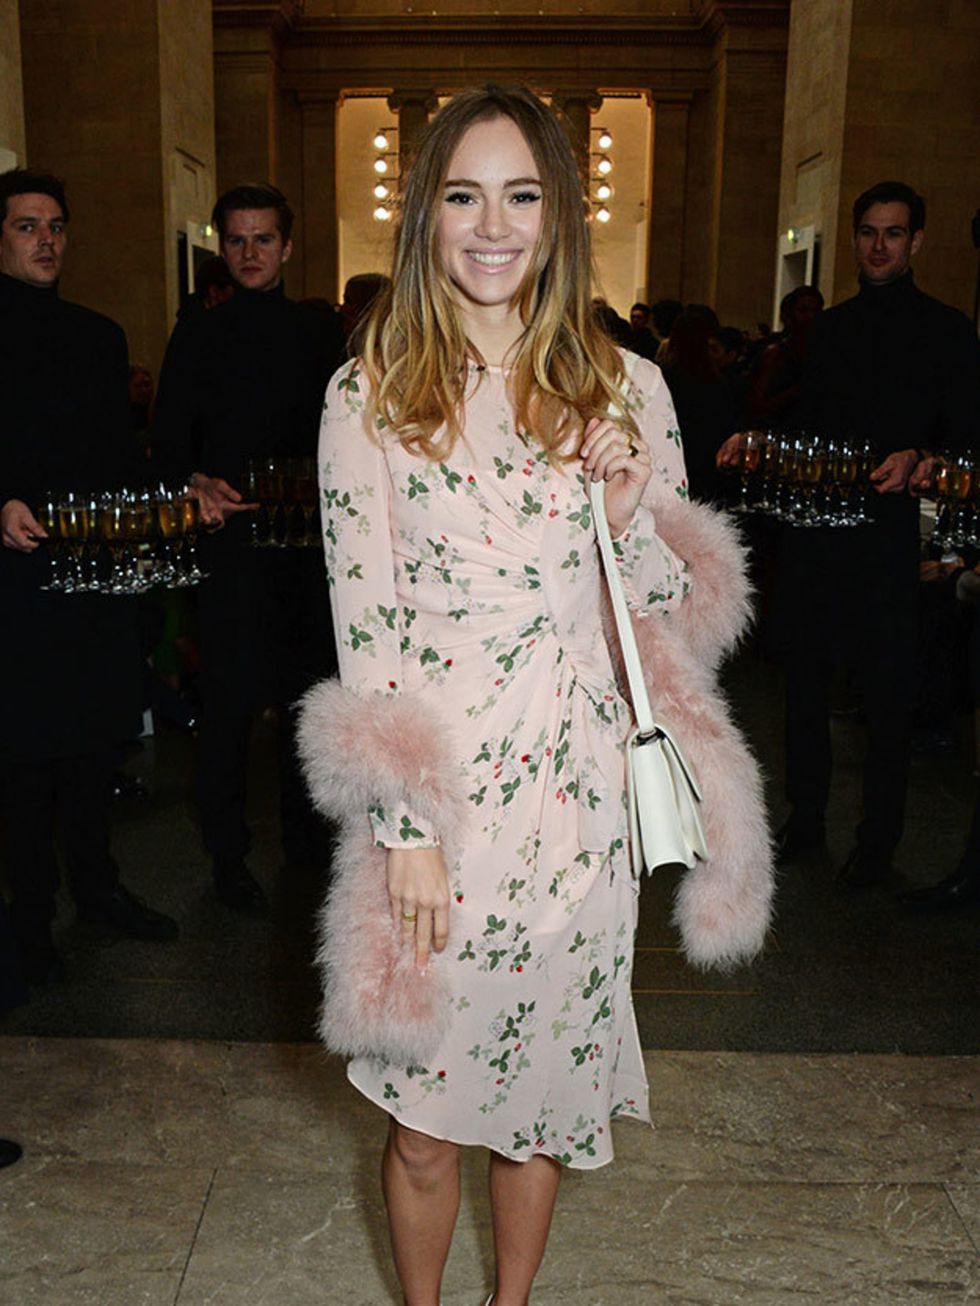 Suki Waterhouse attends the Topshop Unique AW16 show in London, February 2016.